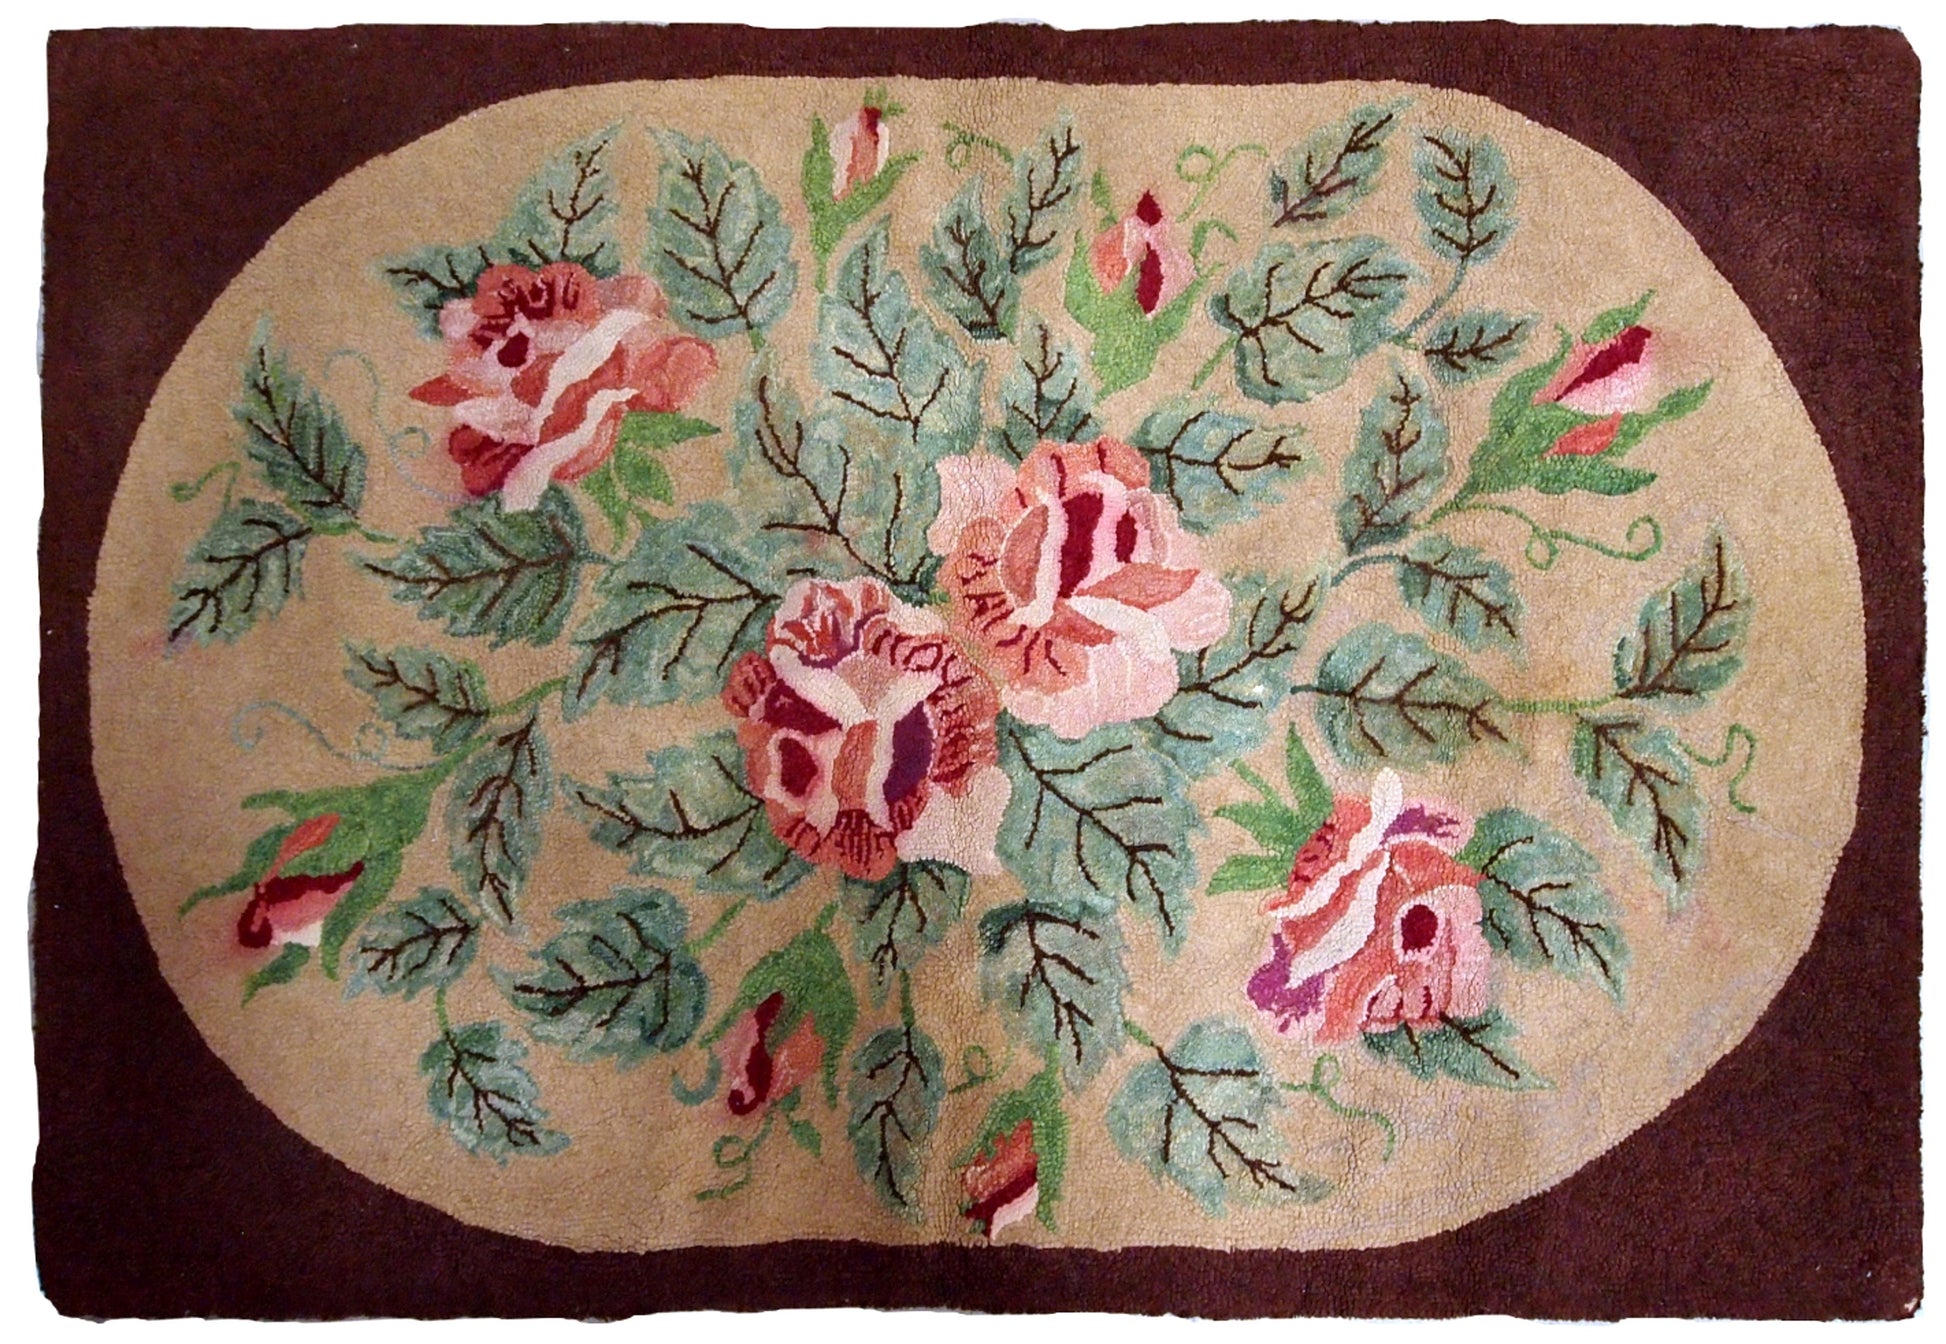 Handmade antique American Hooked rug with red roses. The rug is from the beginning of 20th century and in good condition.